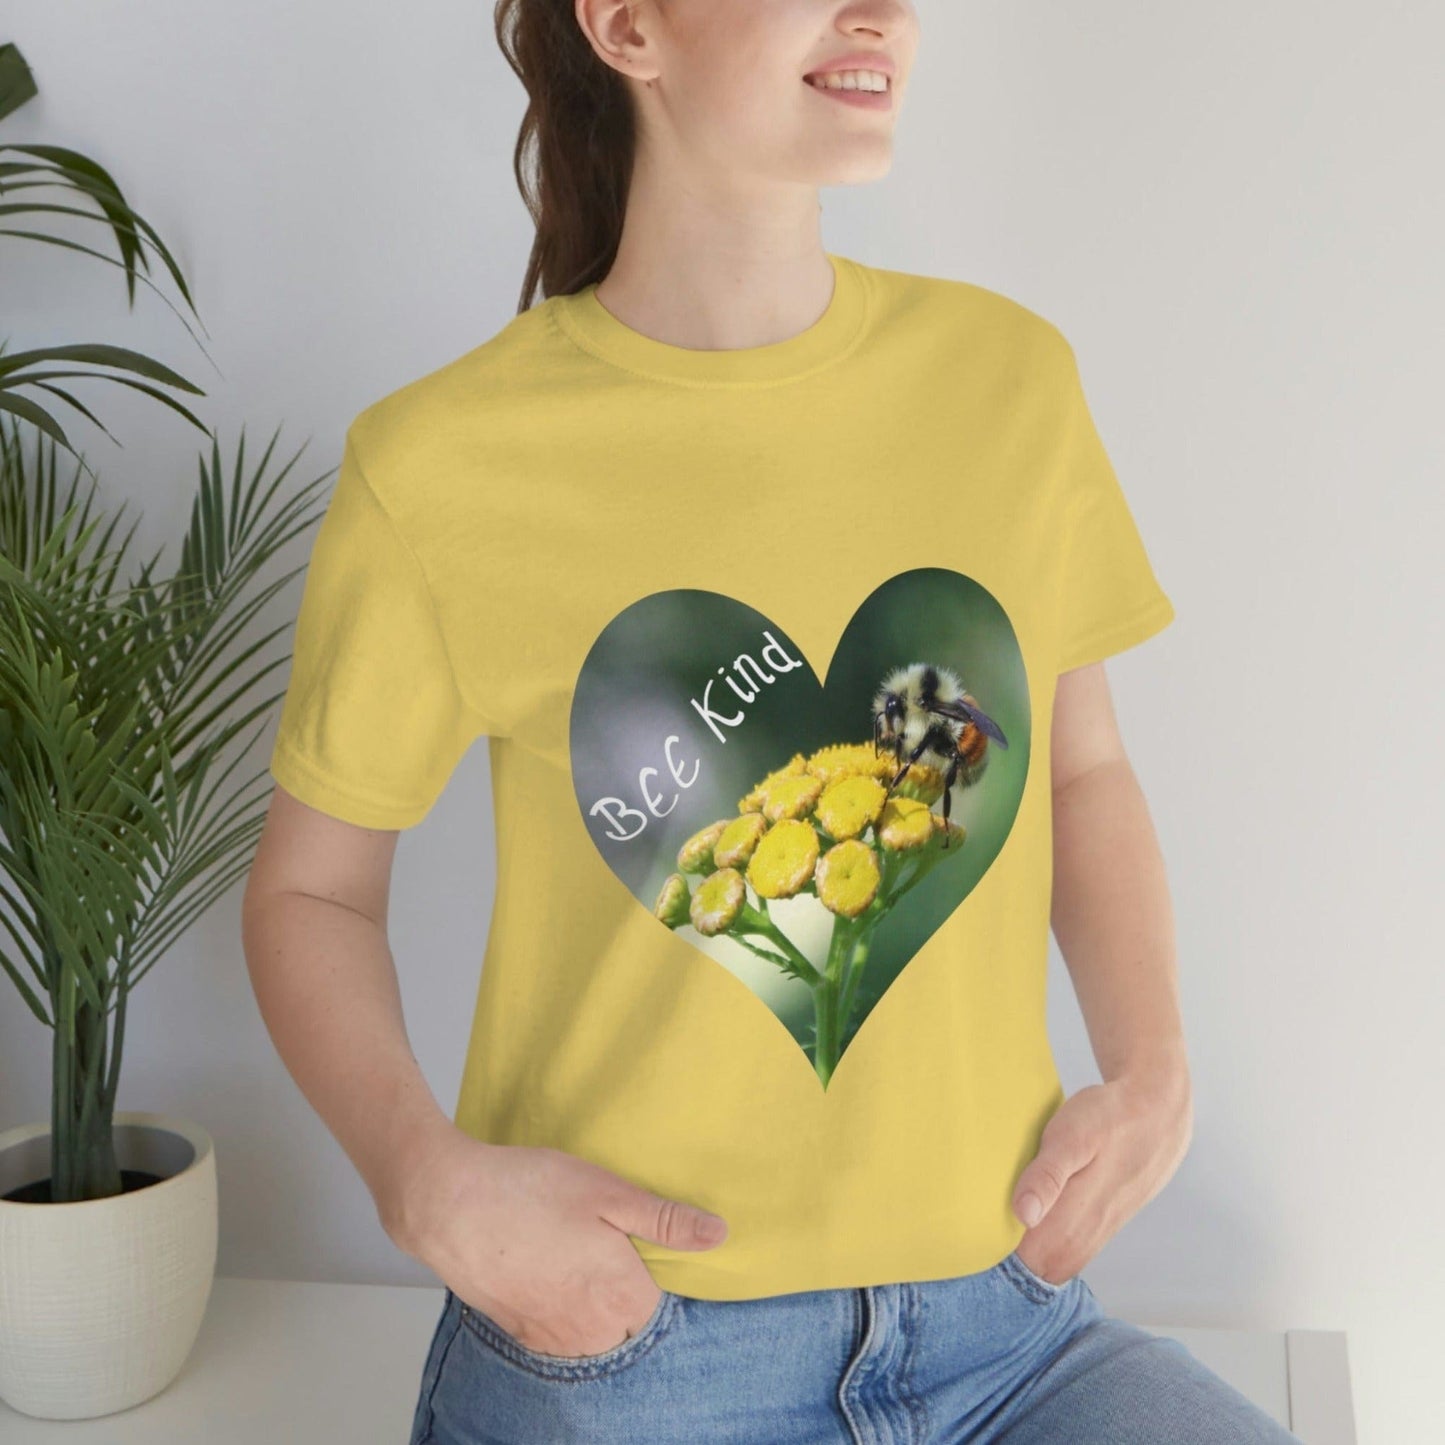 Bee Kind Shirt, Best Selling Kawaii Shirt, Witty Fun Shirt Designs, Honey Bee Gift, Soft Bella Canvas Cool Graphic Tee, Save the Bees, Boho